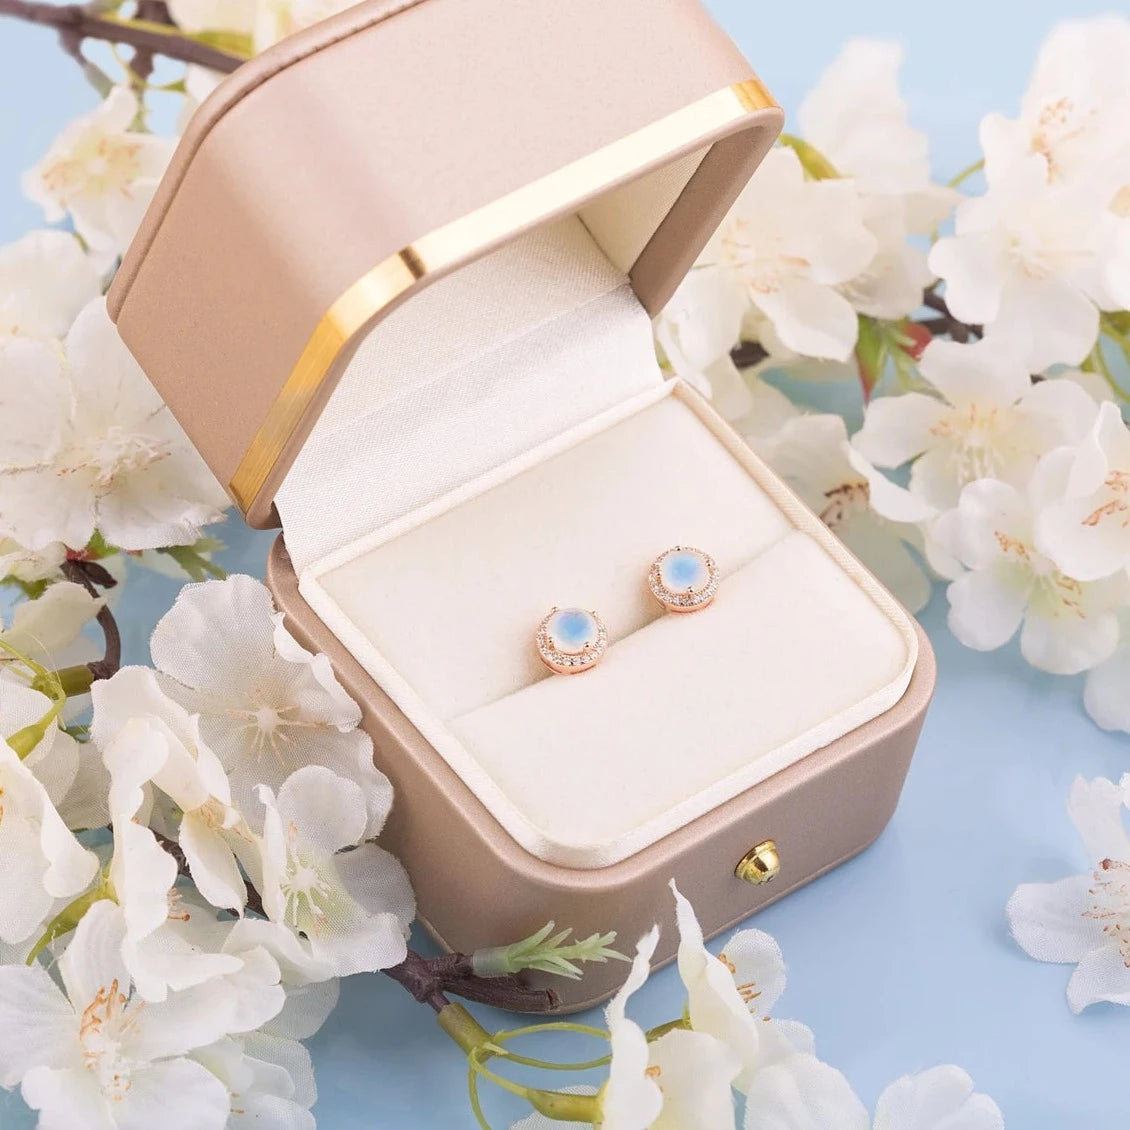 Two Moonstone Round studs in a gift box